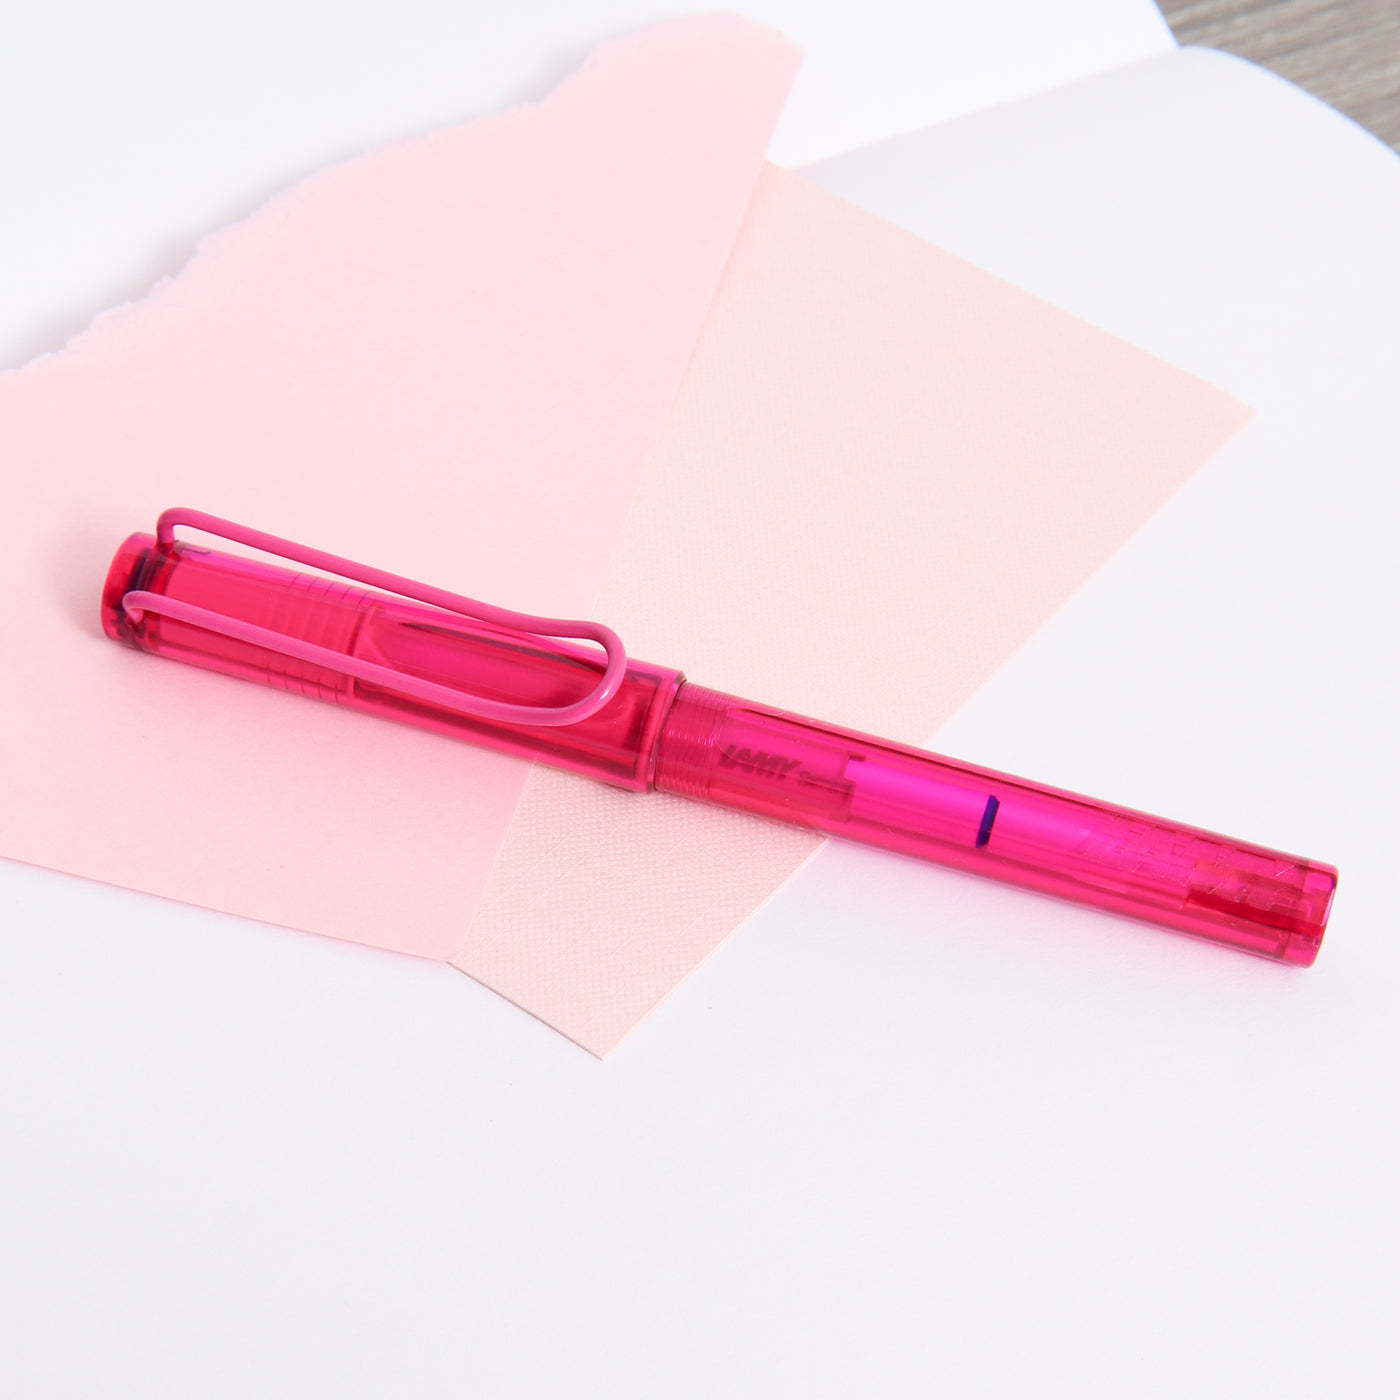 LAMY Balloon Rollerball Pen Pink Capped